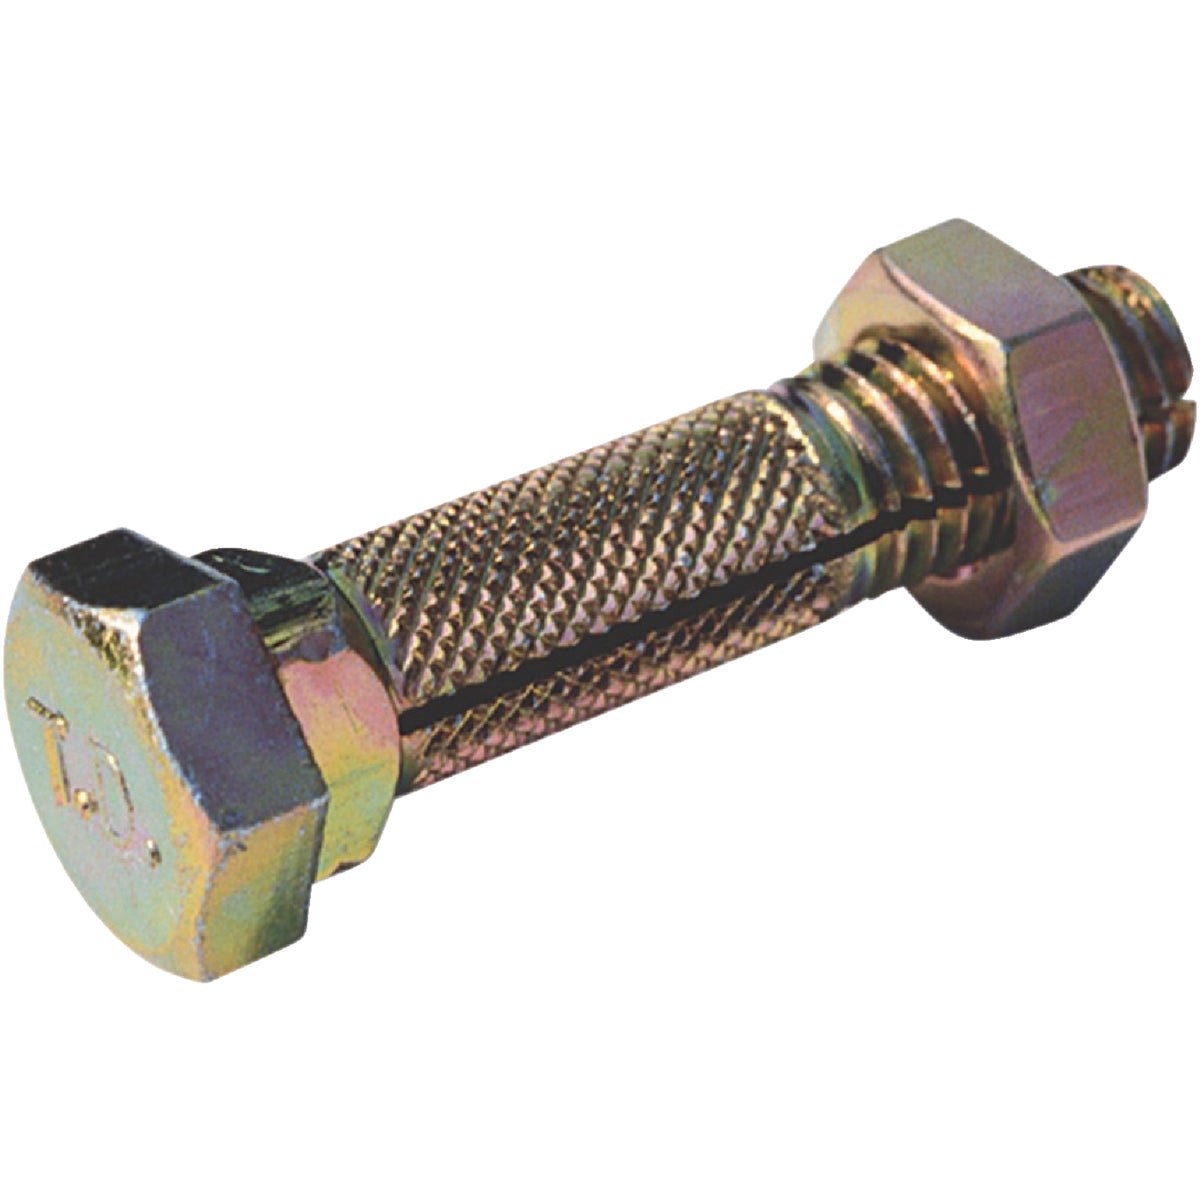 Item 755443, Slotted bolt with nut.